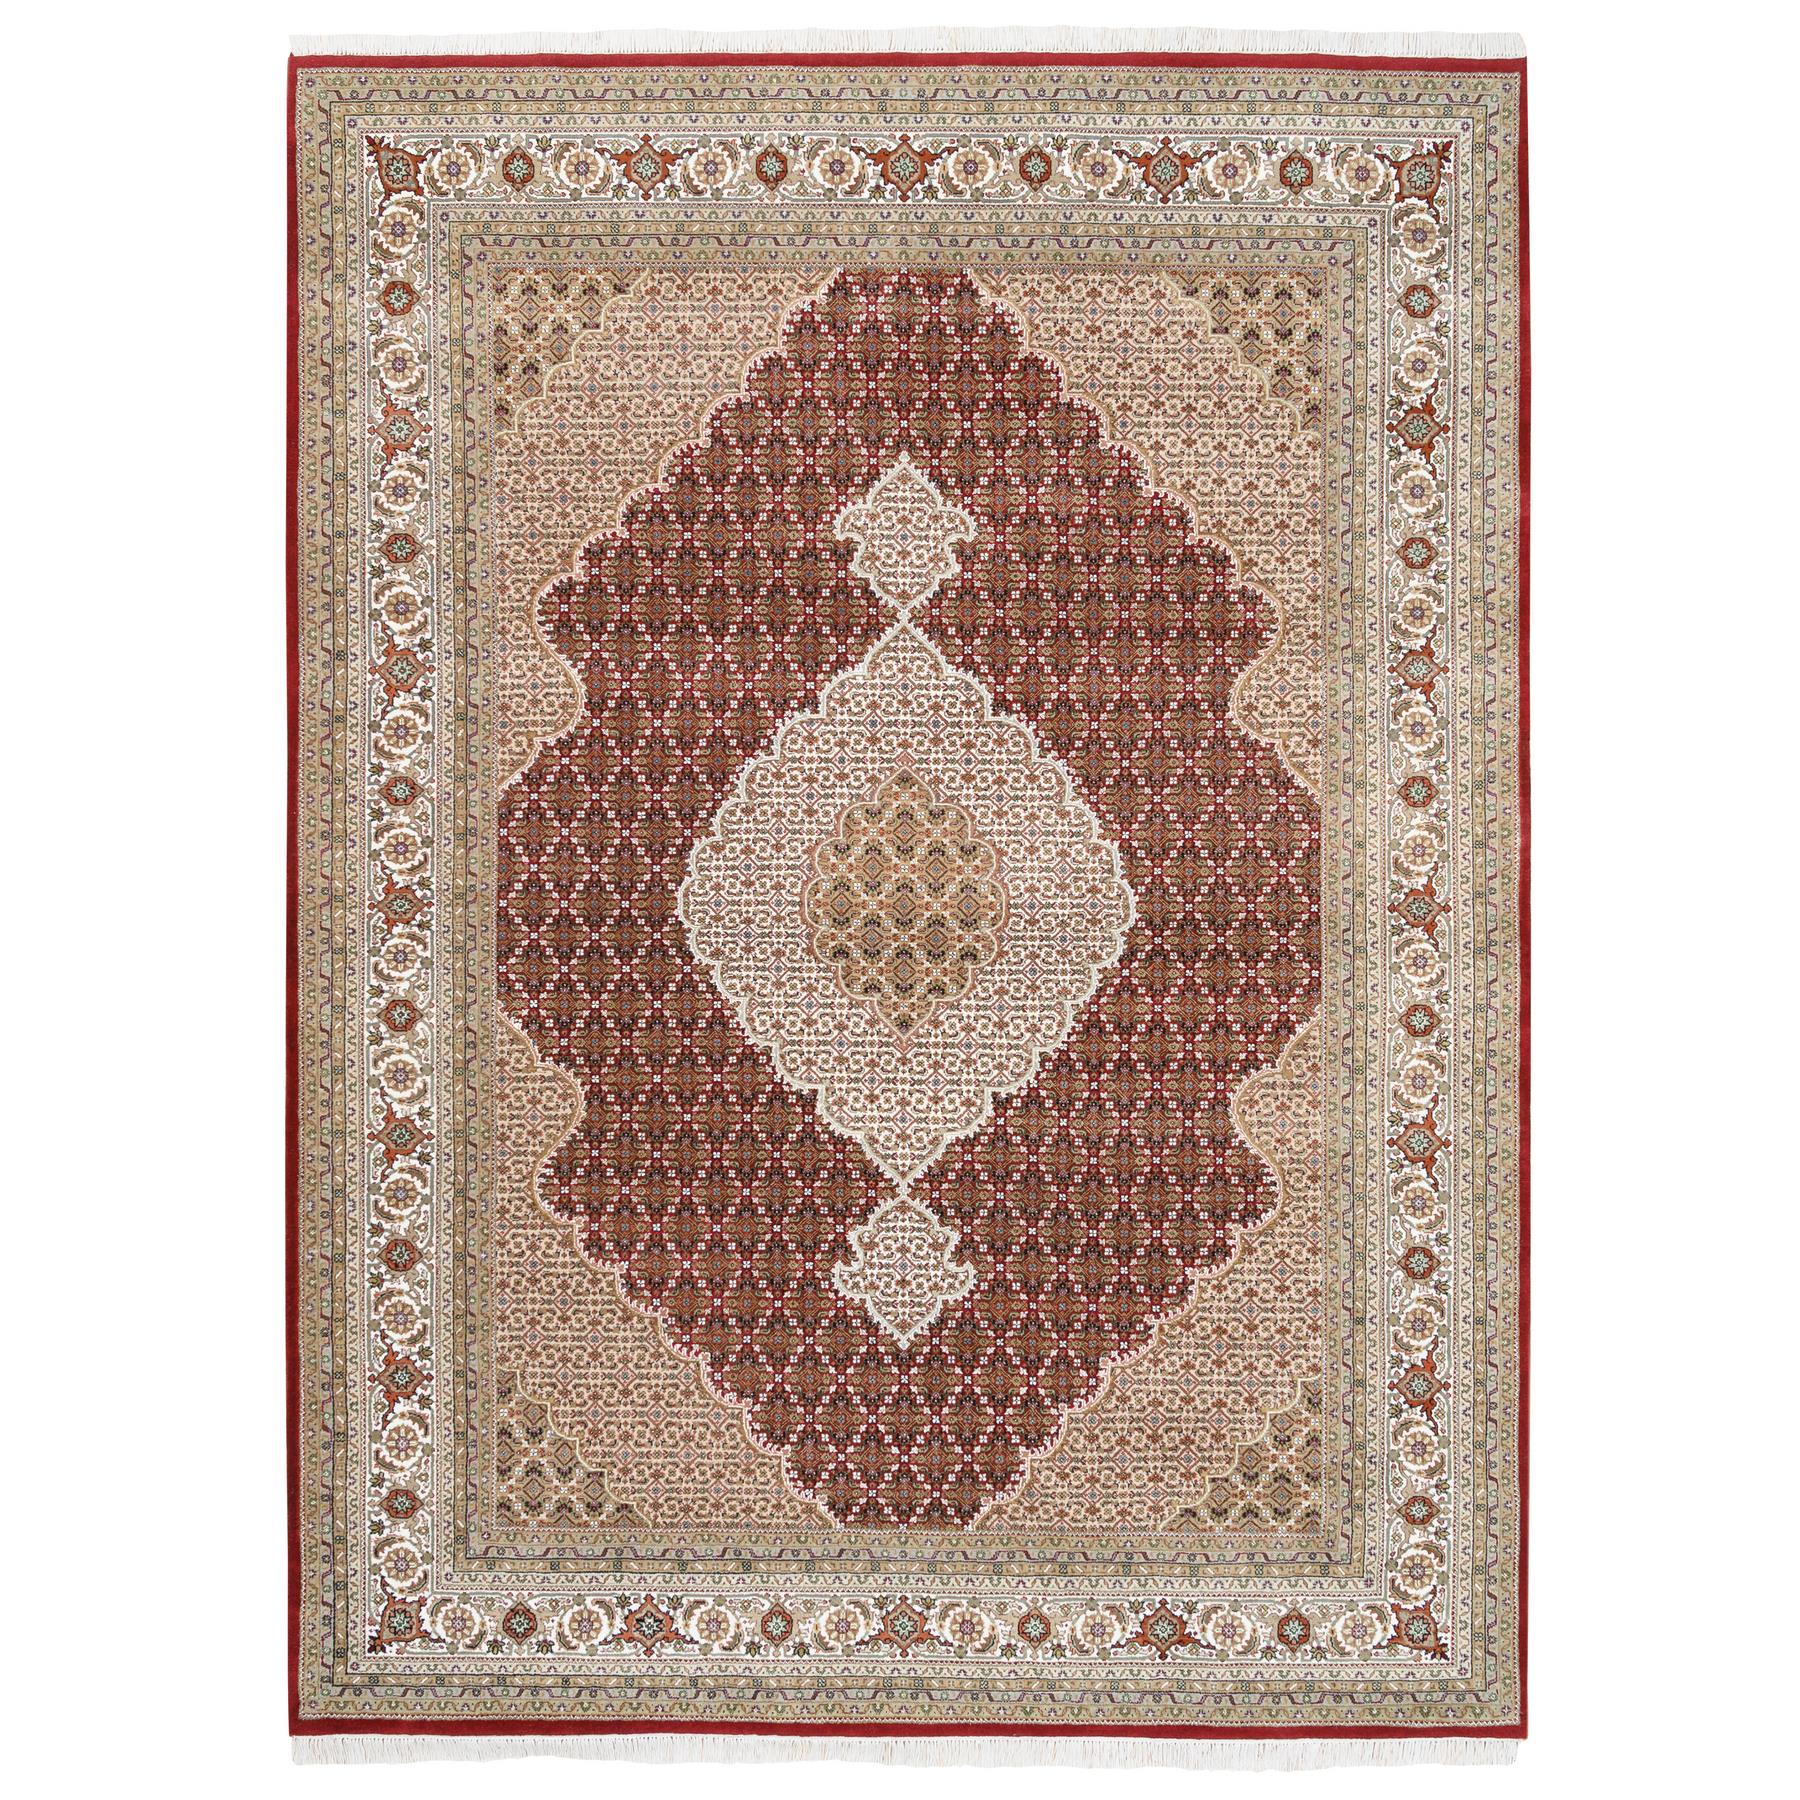 Pirniakan Collection Hand Knotted Red Rug No: 1125216